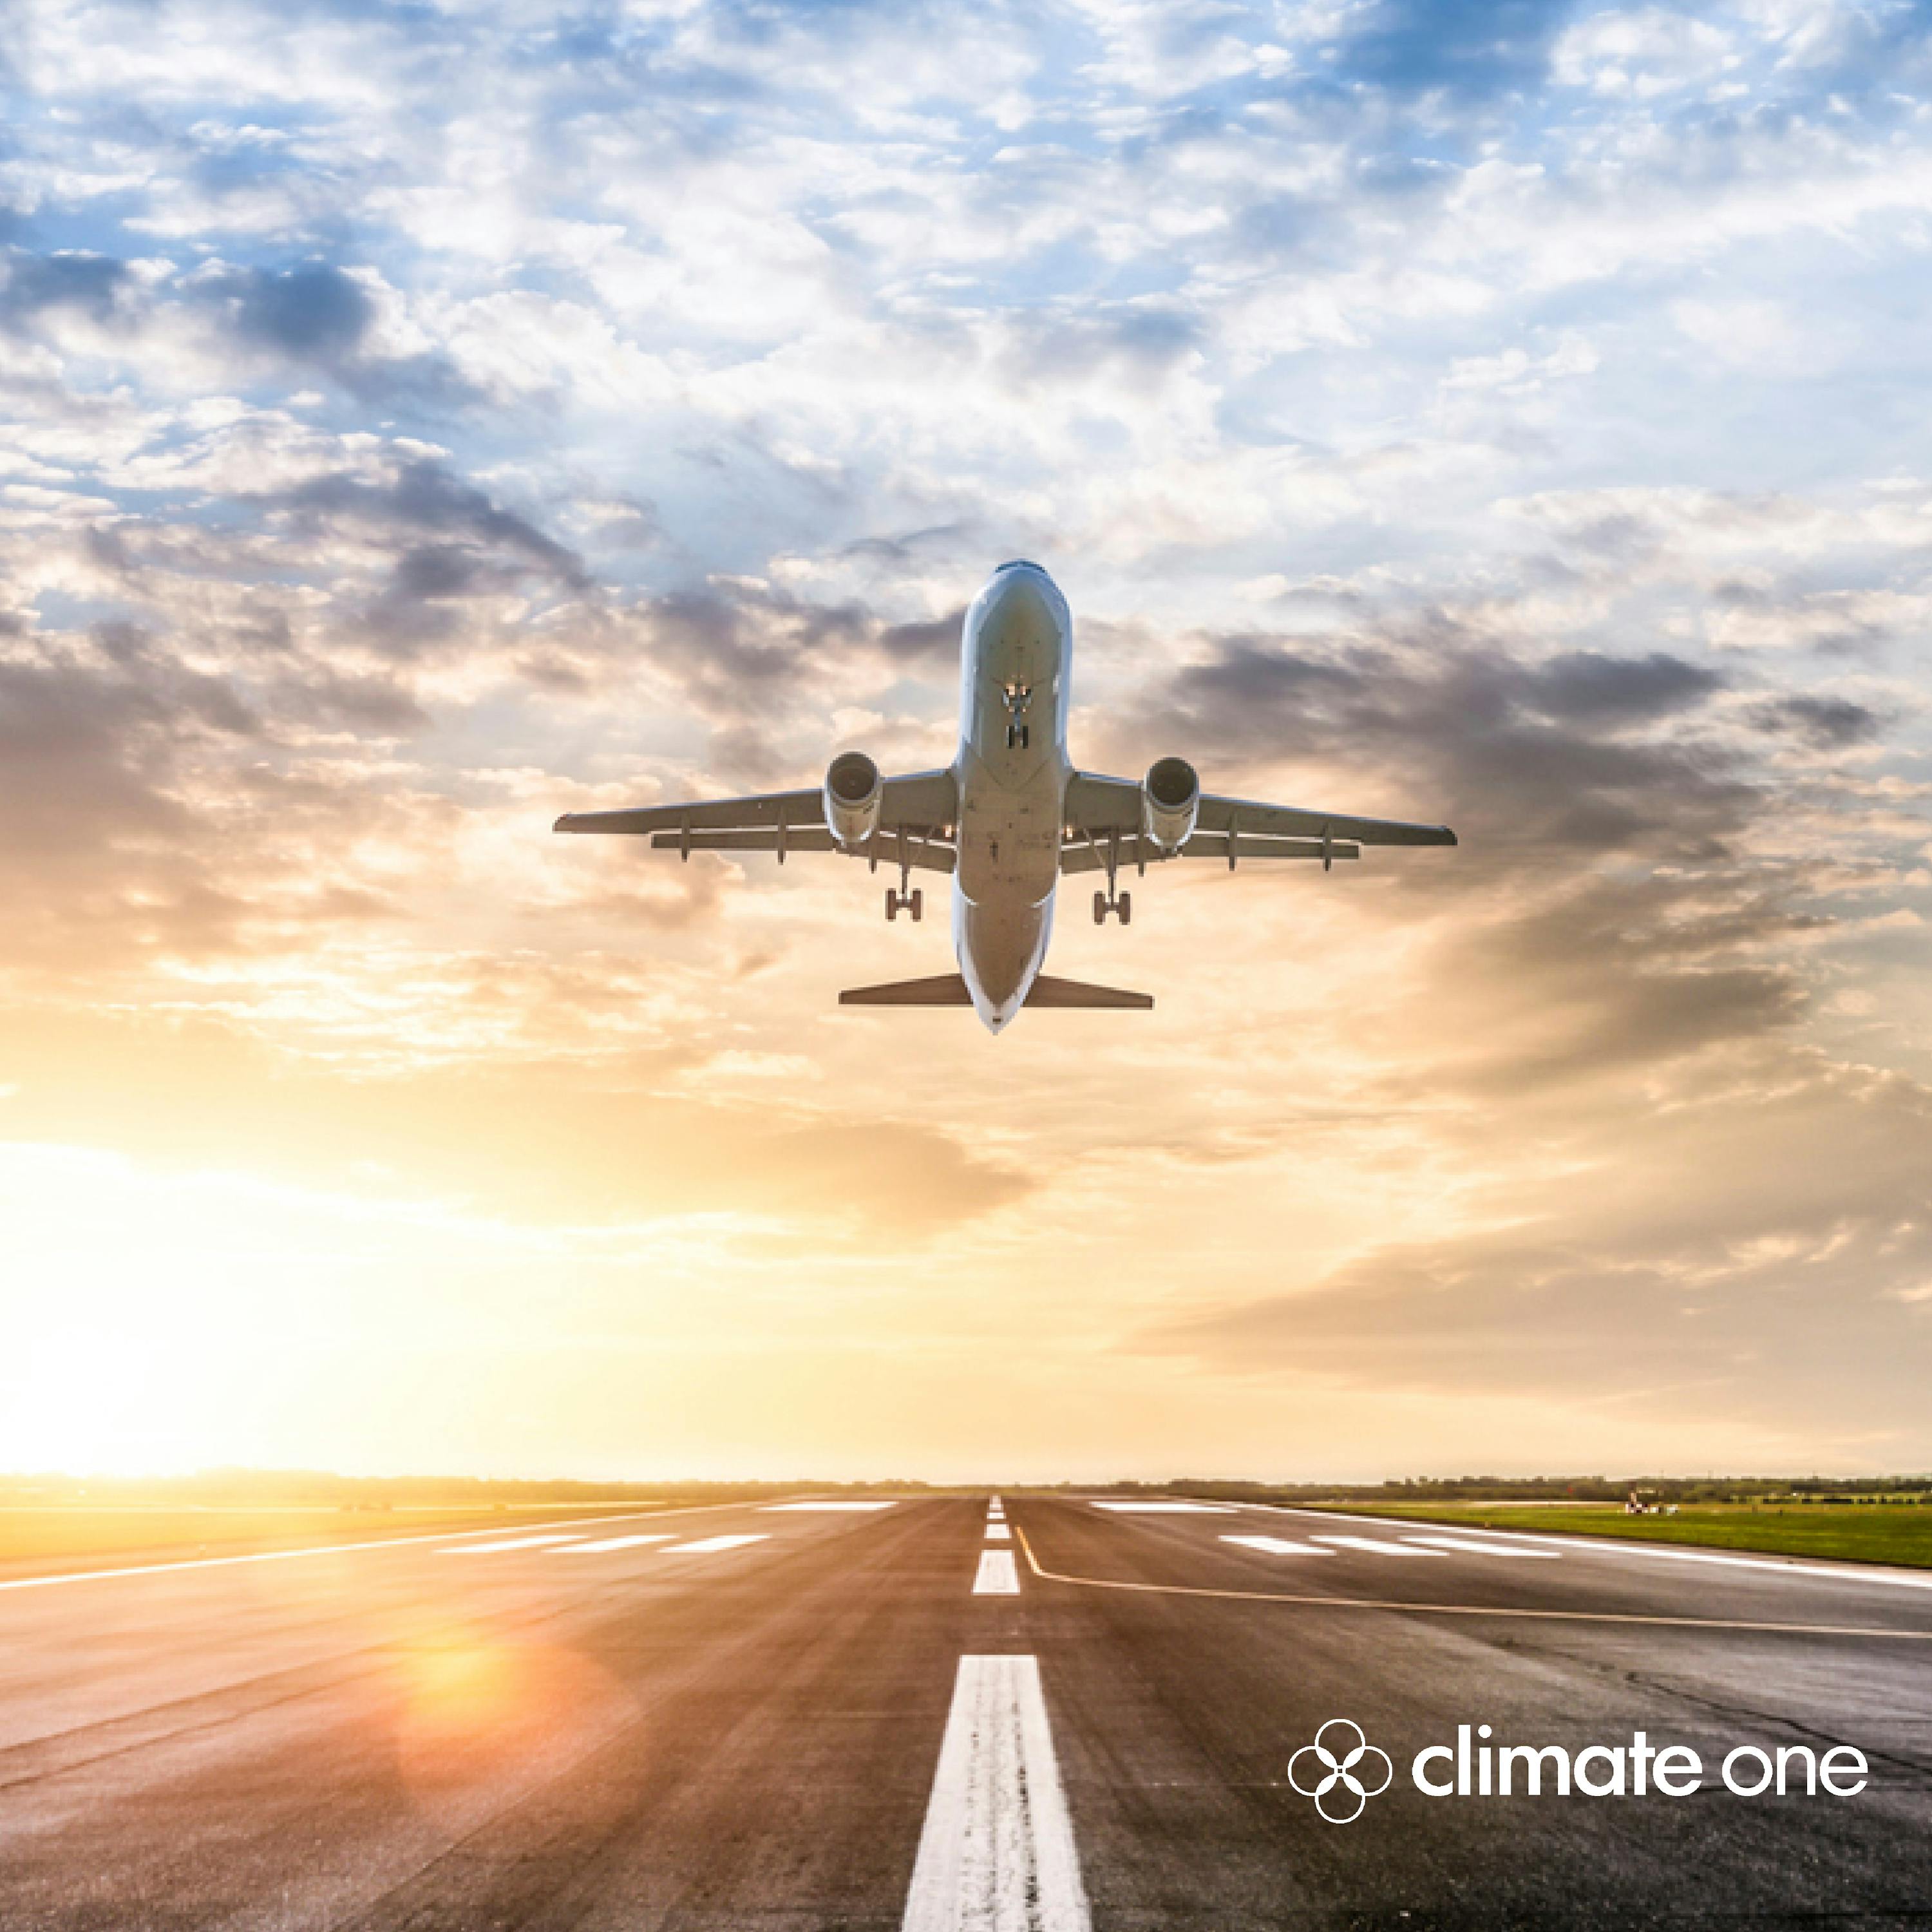 Will Sustainable Aviation Ever Take Off?